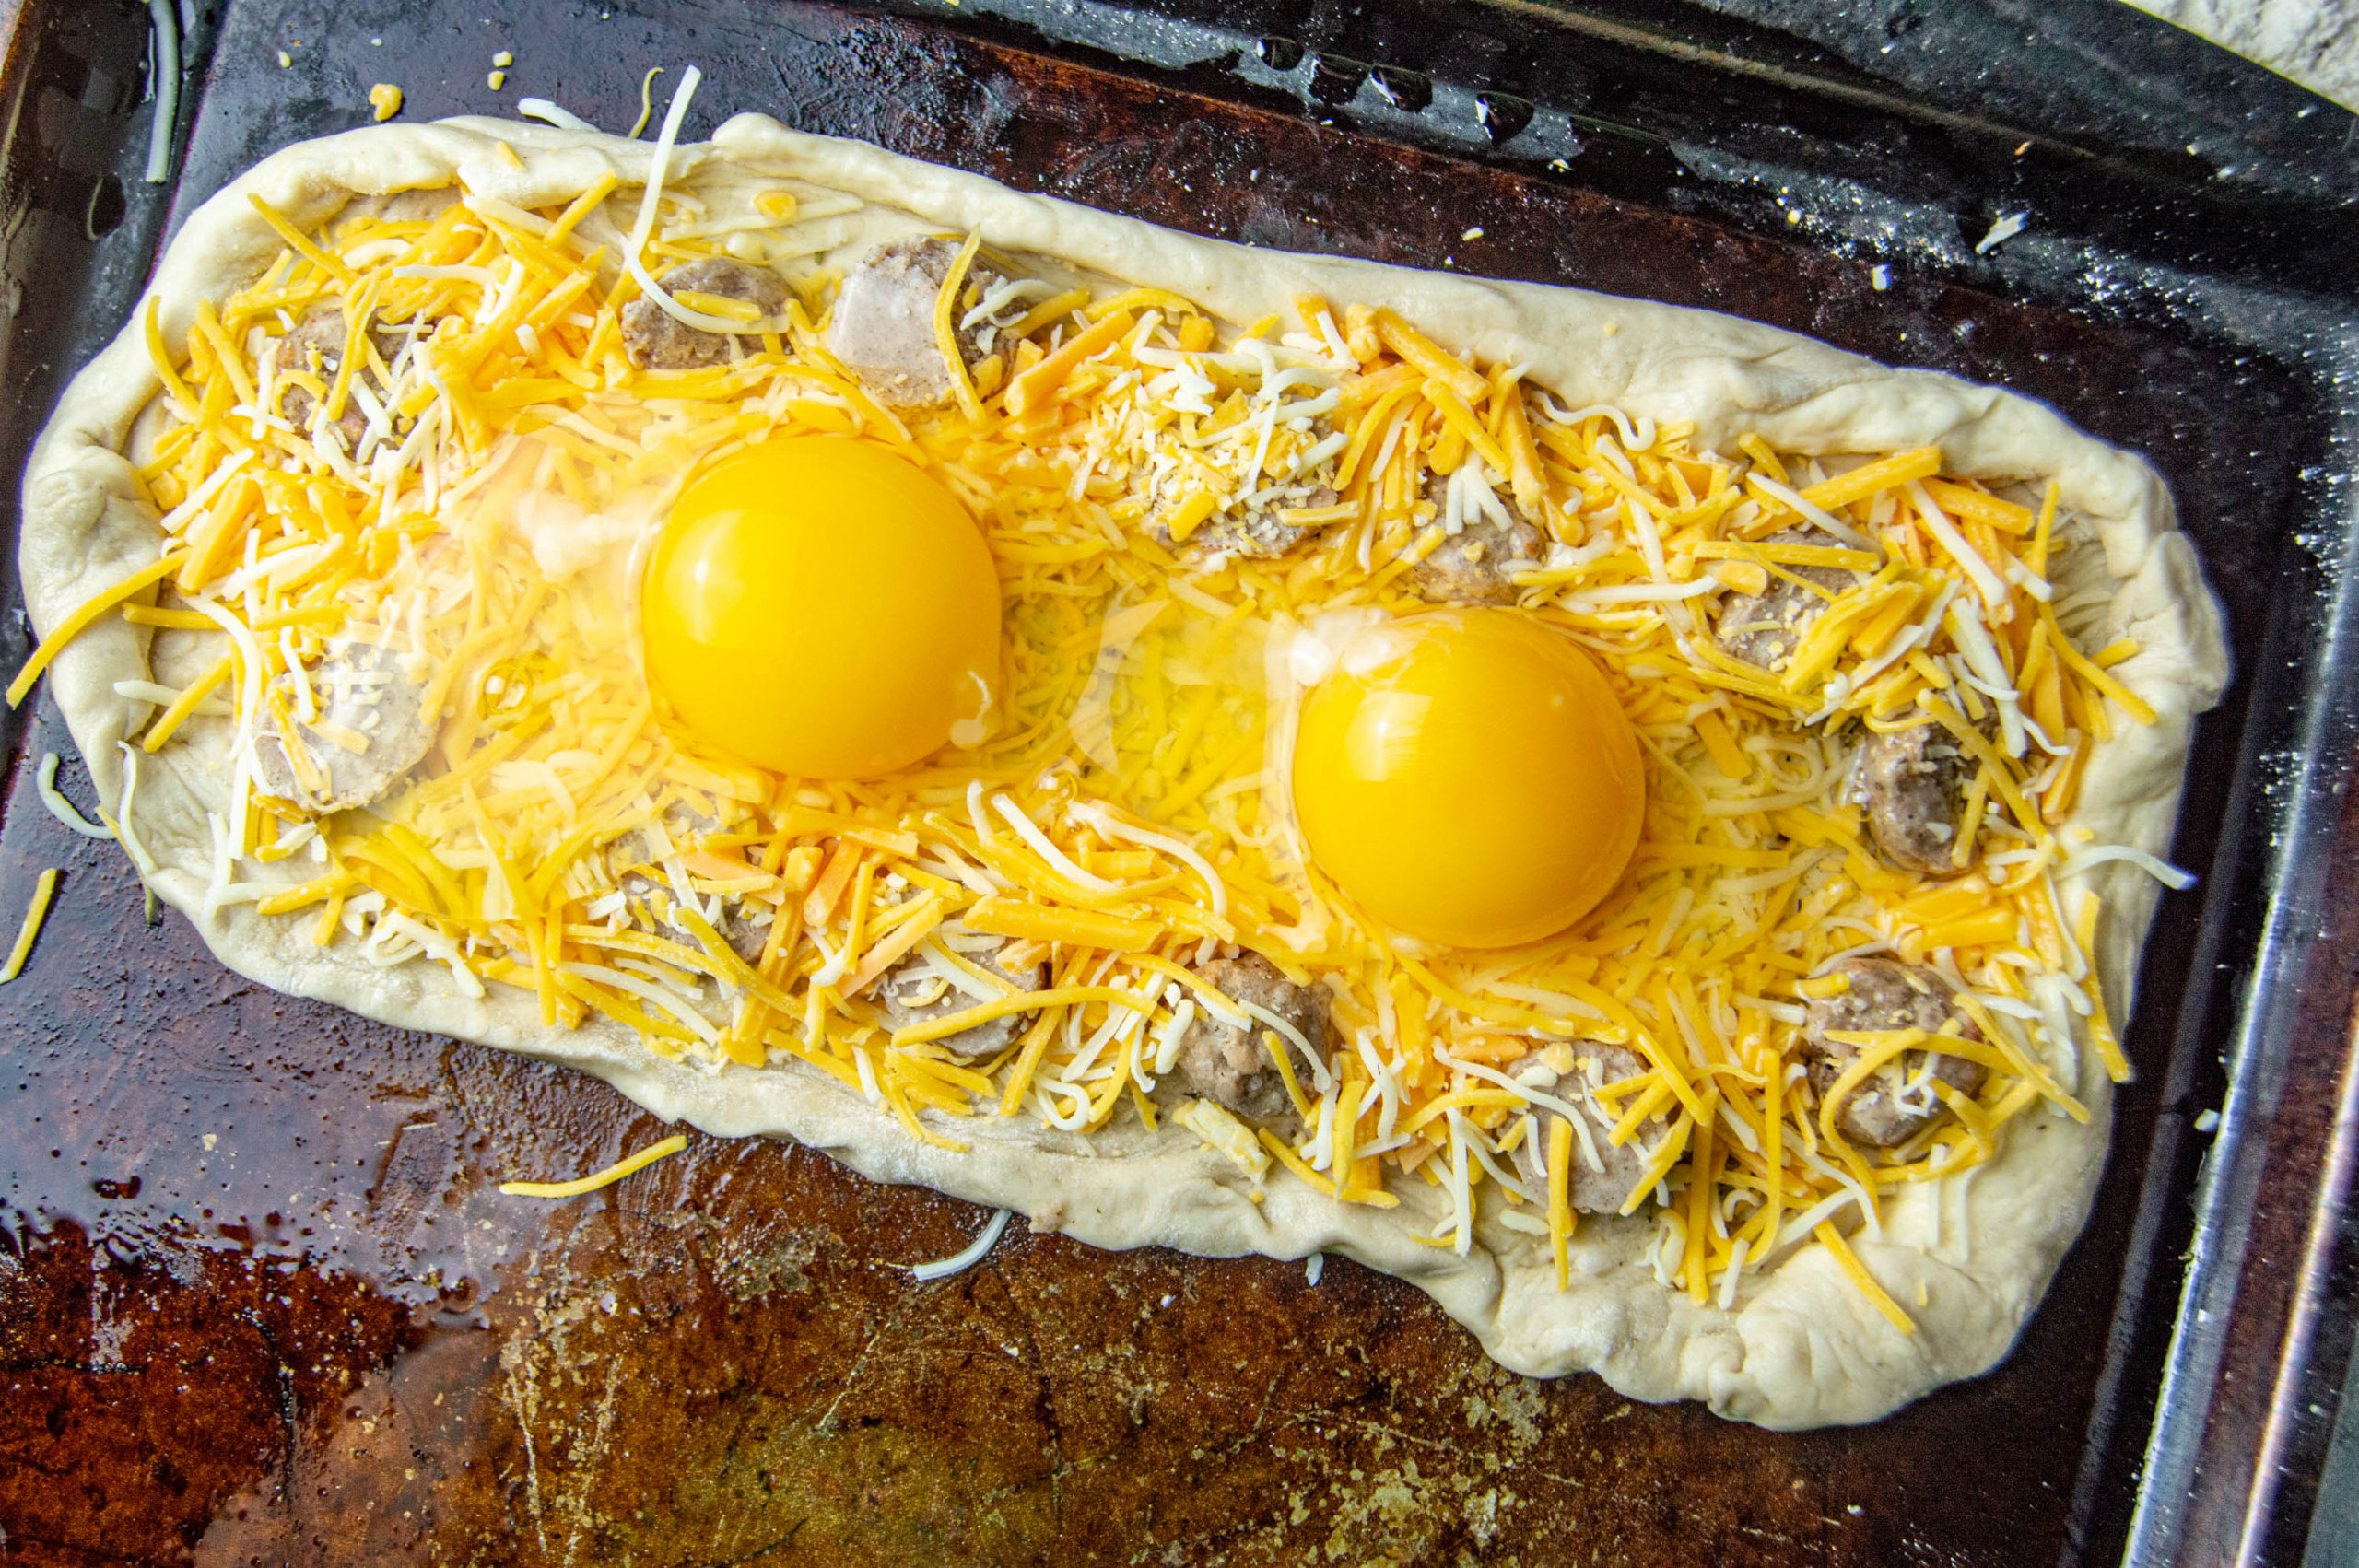 breakfast pizza nearly ready to go in the oven